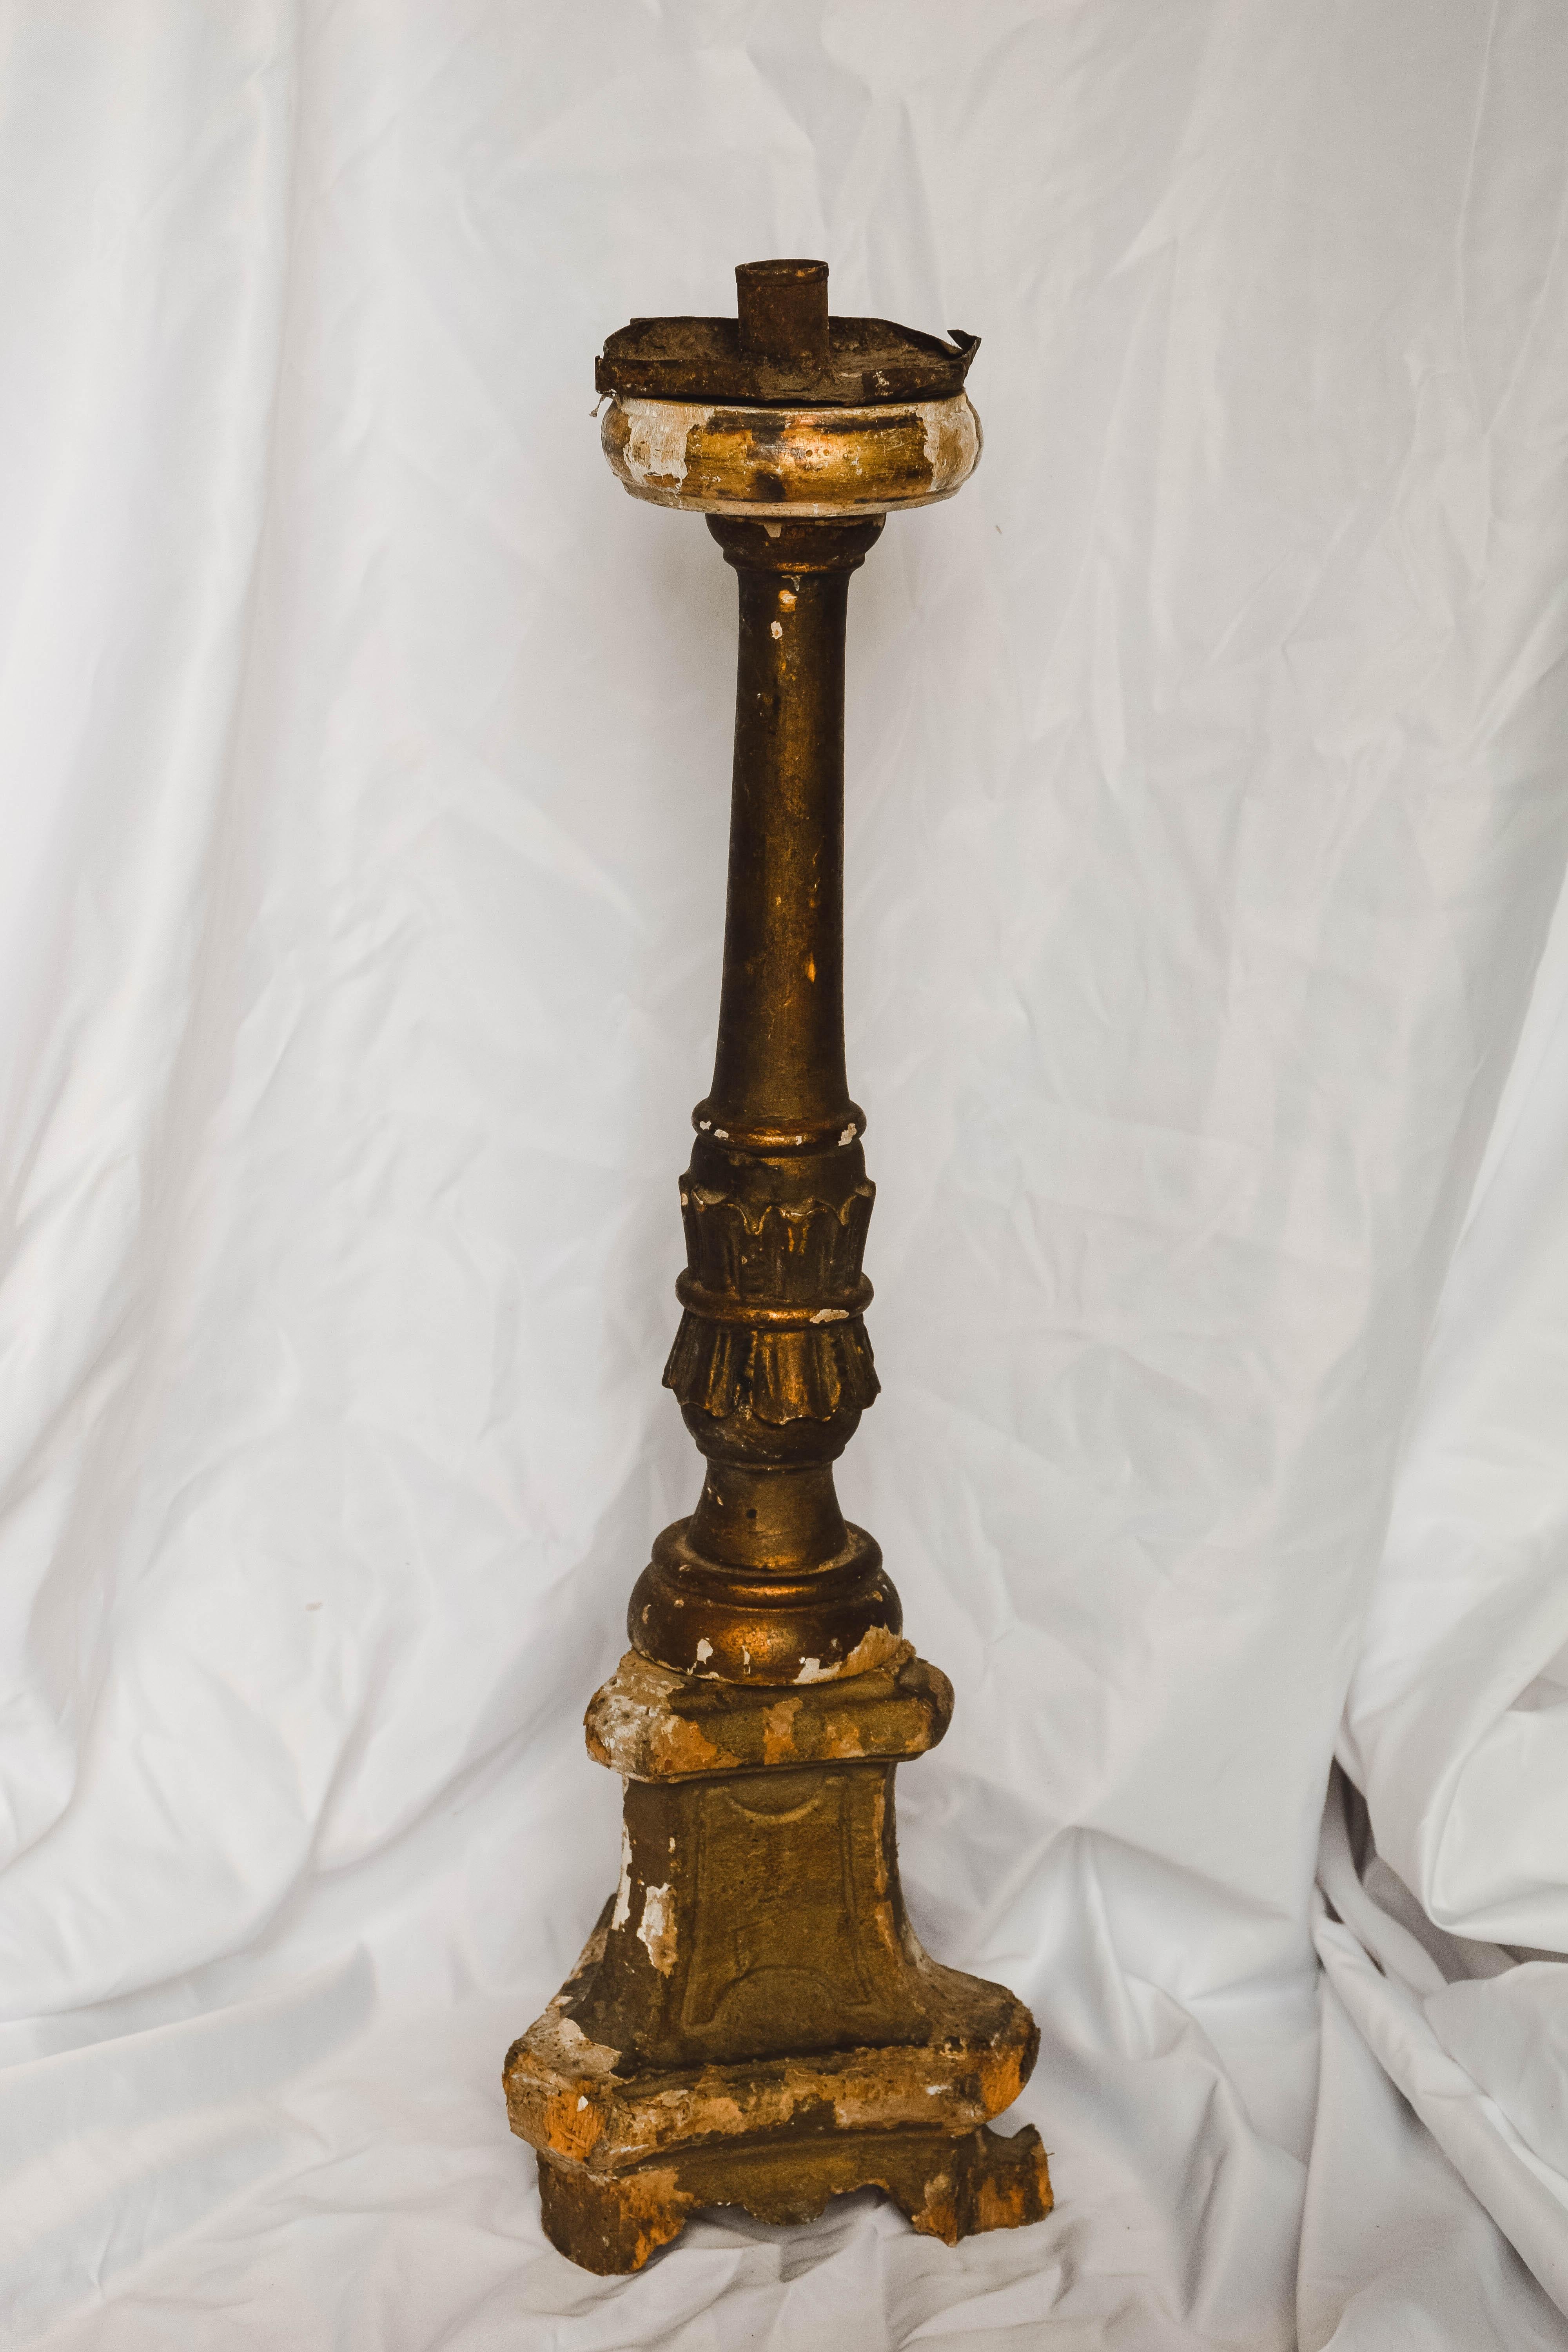 Italian late 18th-early 19th century gilded altarstick. This Italian altarstick features gilding on all sides, however it does show some wear. The central column is hand carved and is raised on a tripod base. The top of this altarstick is metal and